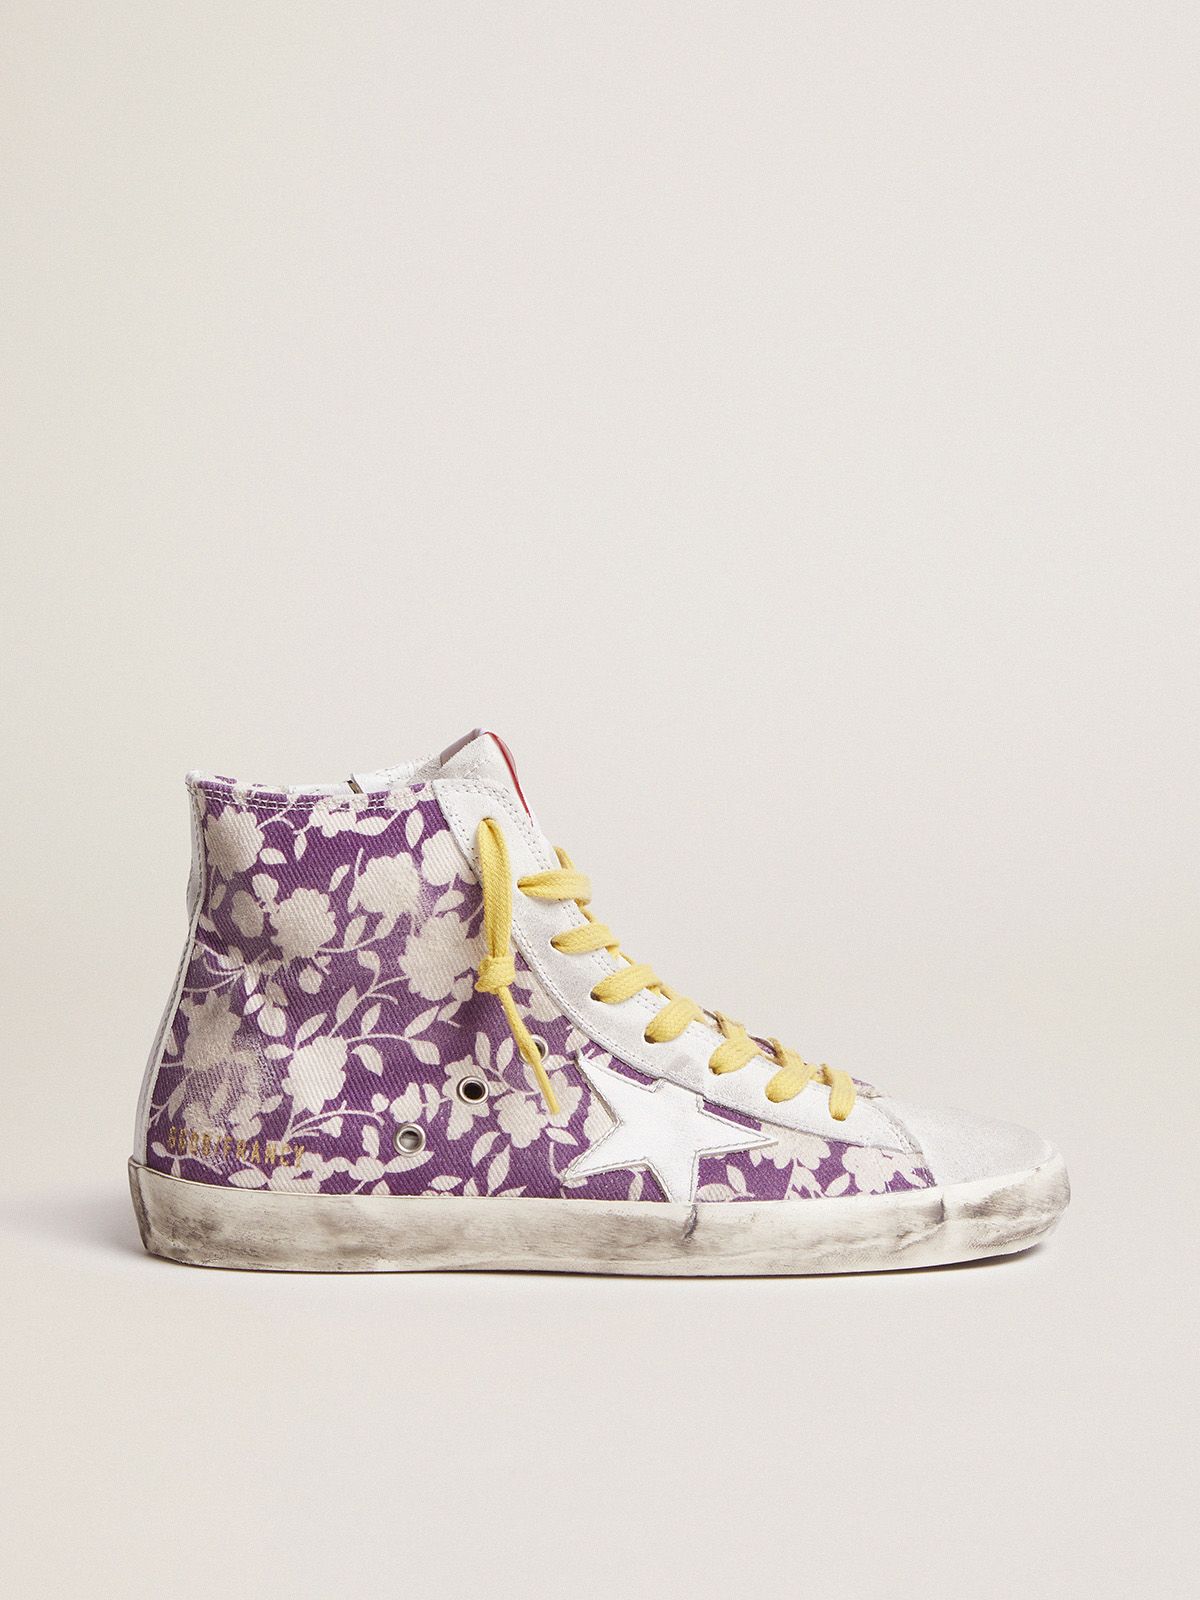 Golden Goose Uomo Saldi Francy LTD sneakers in canvas with floral pattern